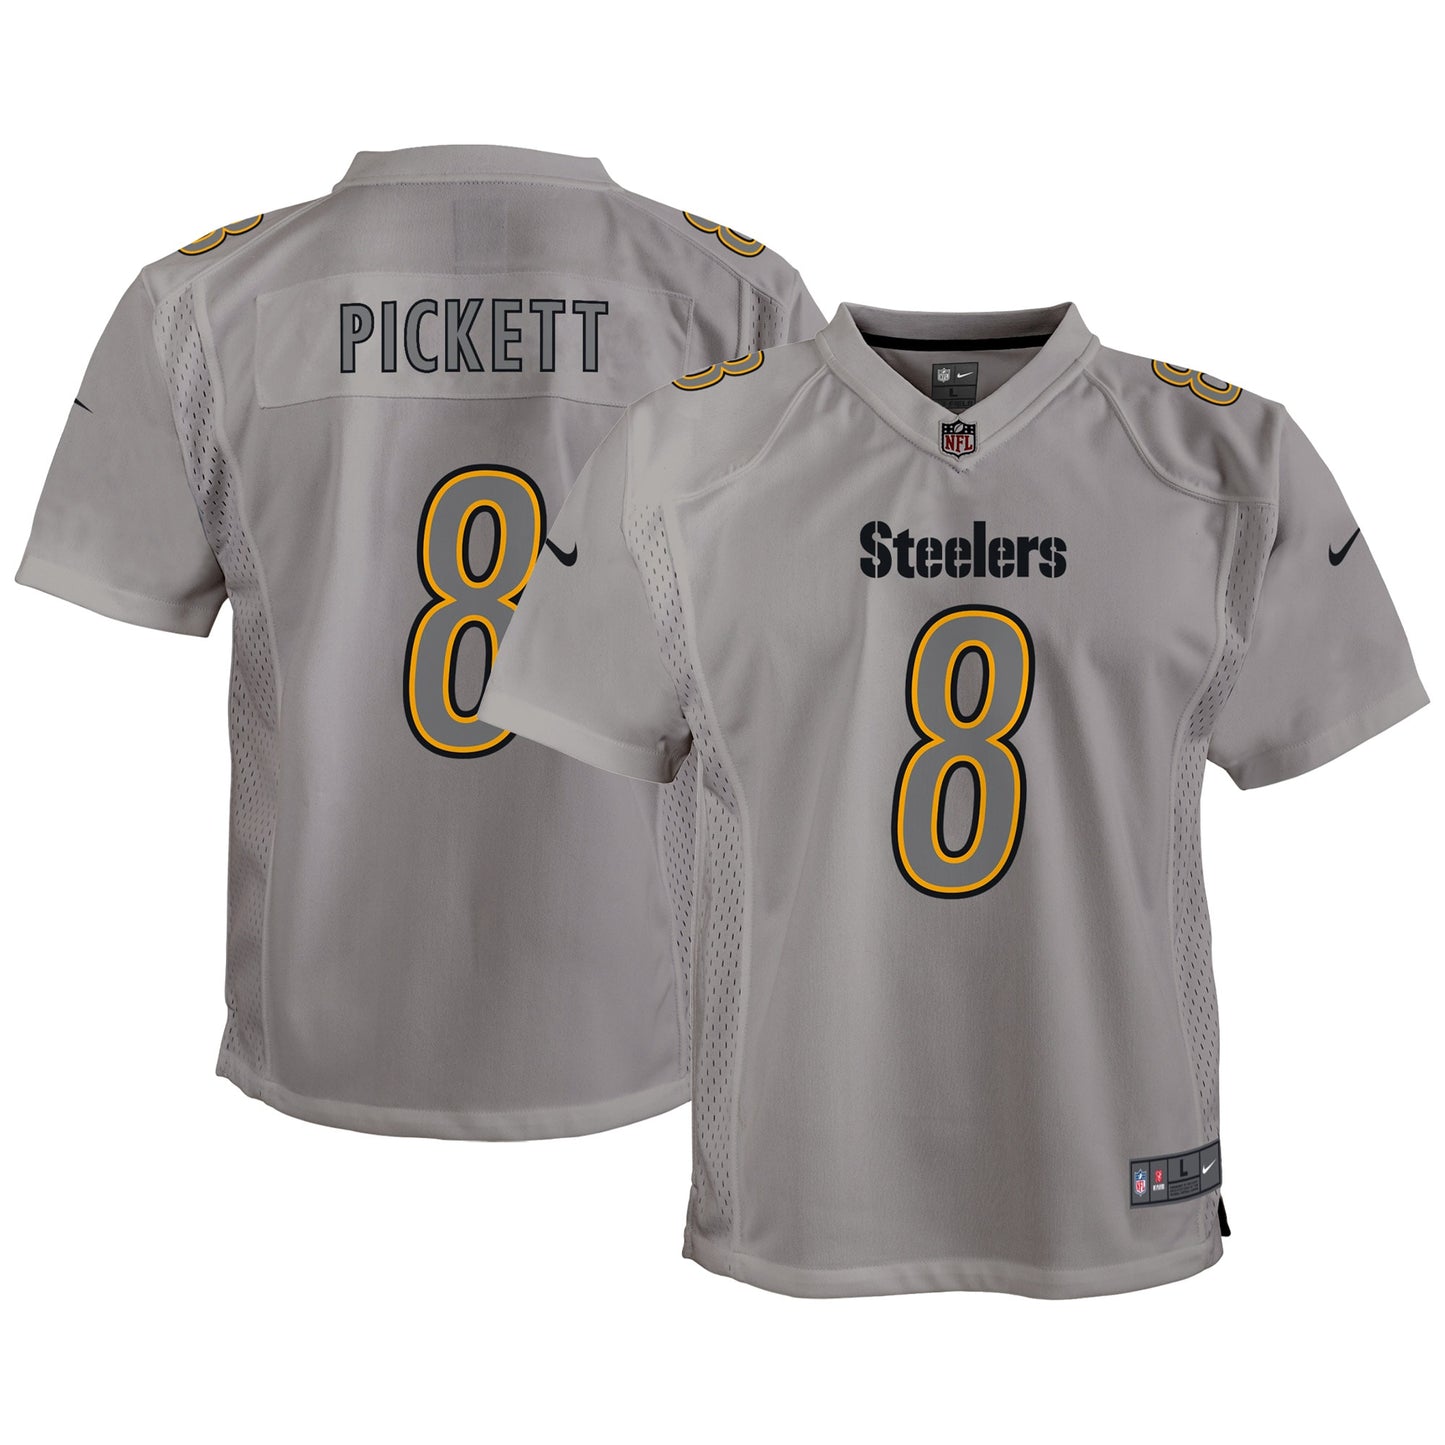 Kenny Pickett Pittsburgh Steelers Nike Youth Atmosphere Game Jersey - Gray